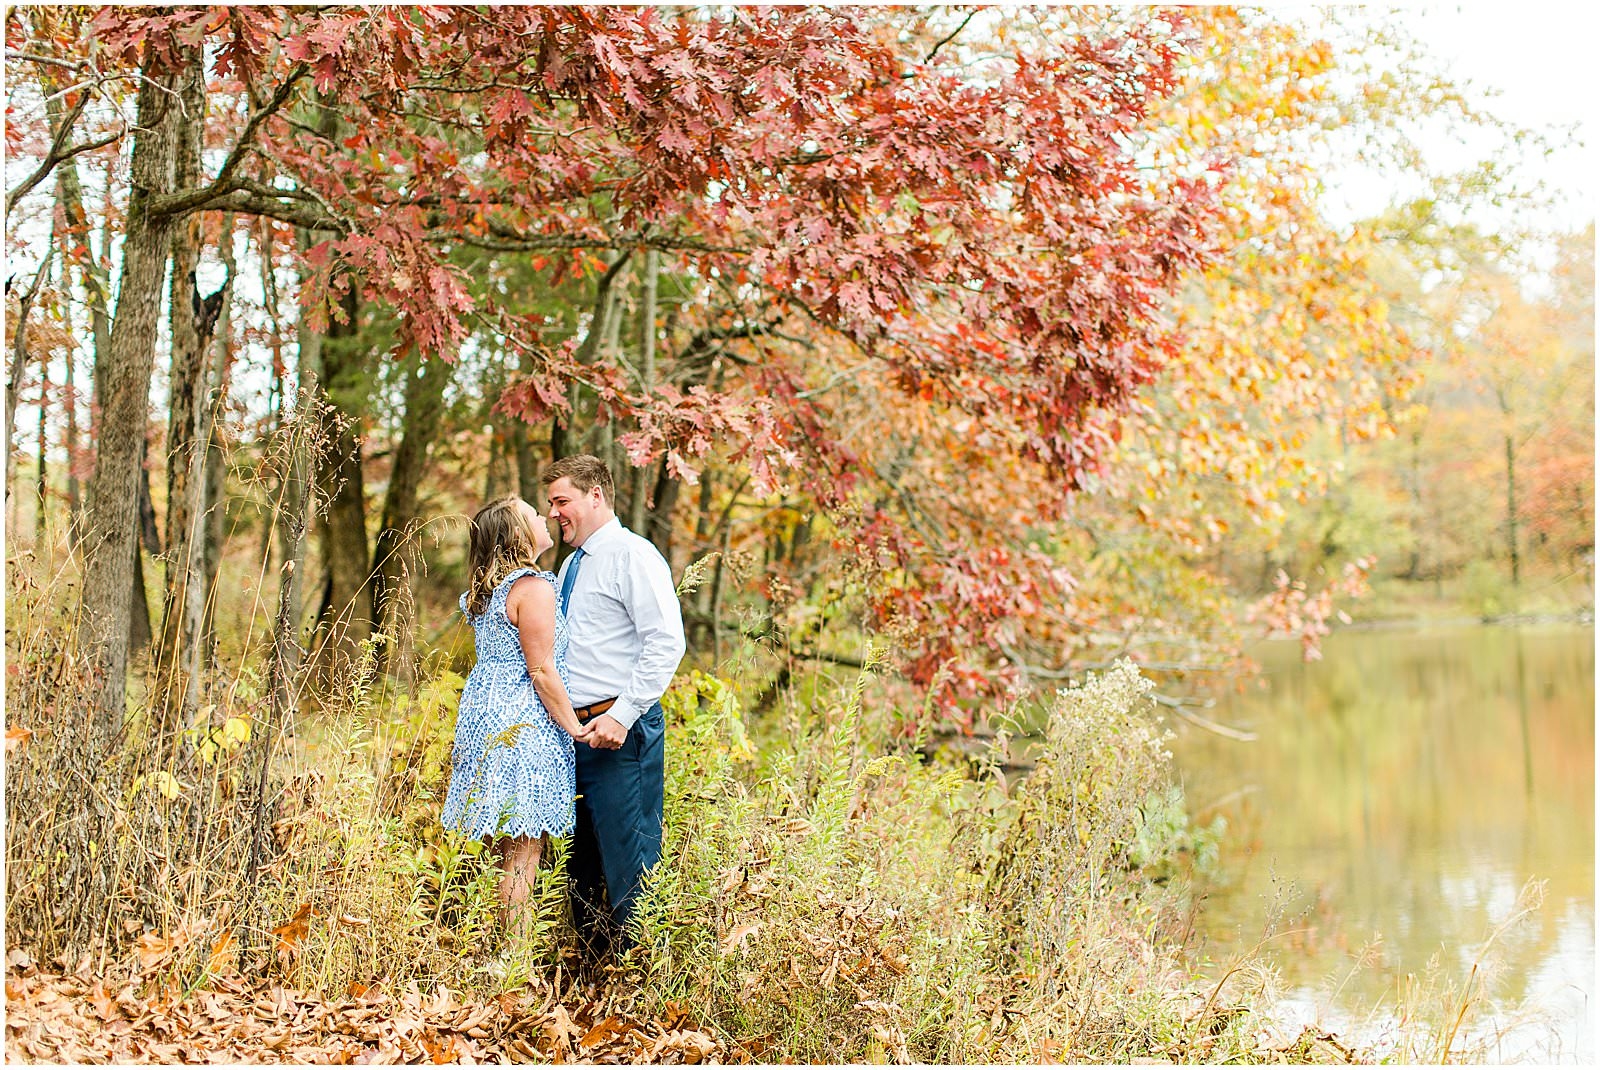 A Southern Illinois Engagement Session | Roxanne and Matthew | Bret and Brandie Photography 0006.jpg